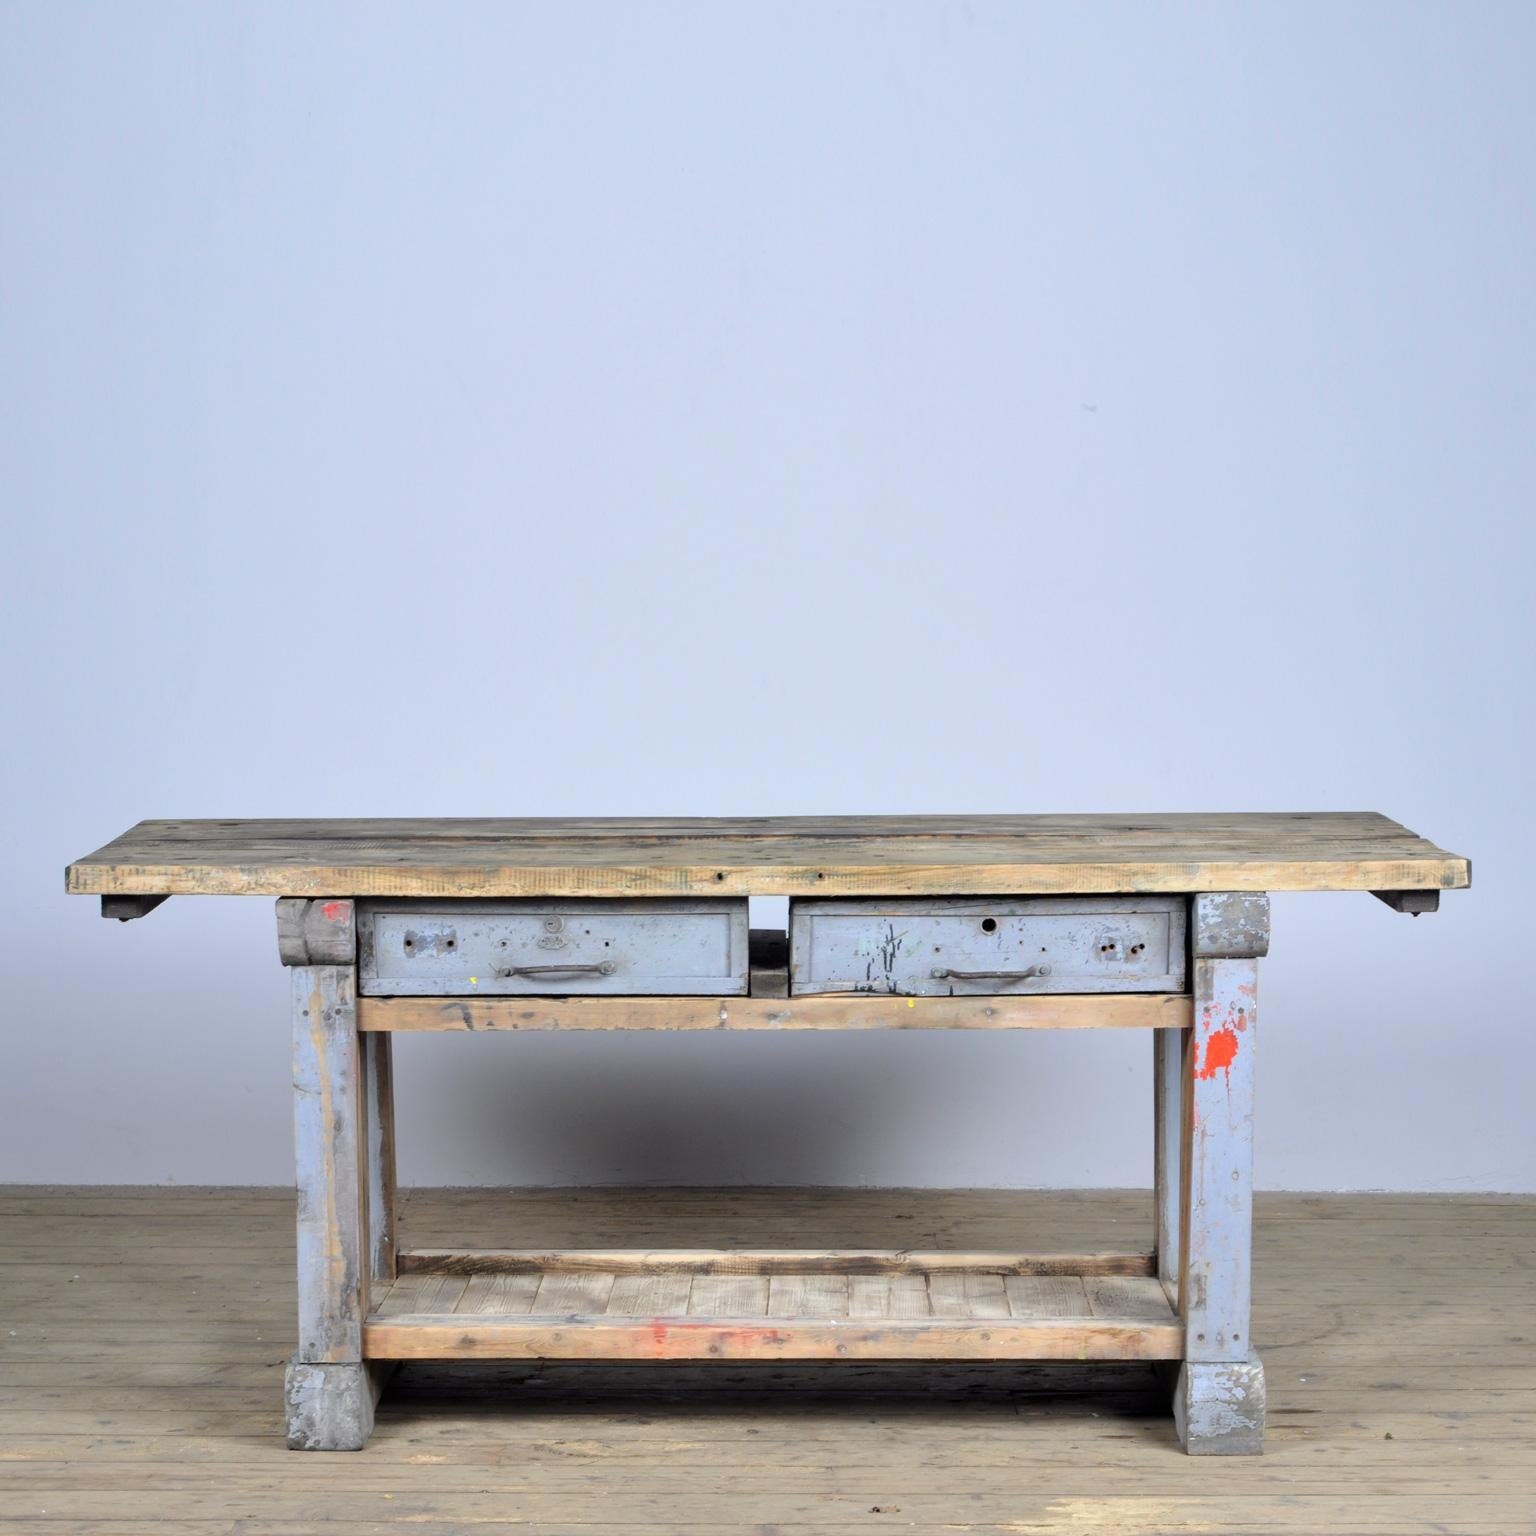 Industrial hardwood worktable from the 1950s. With two drawers. The table is restored and ready to use!
 